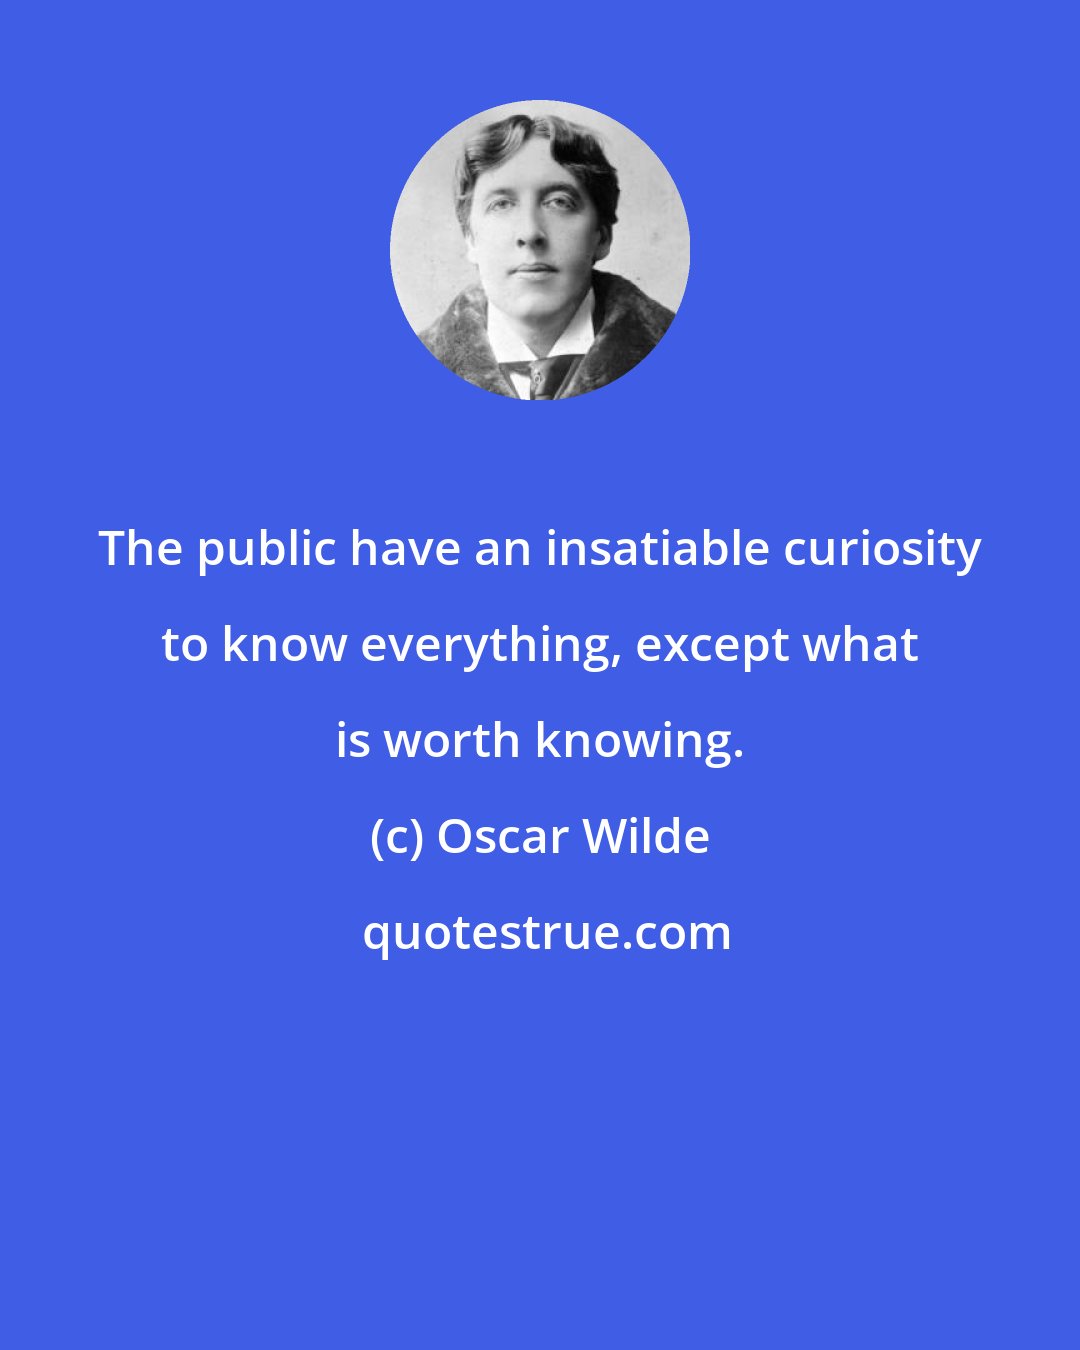 Oscar Wilde: The public have an insatiable curiosity to know everything, except what is worth knowing.